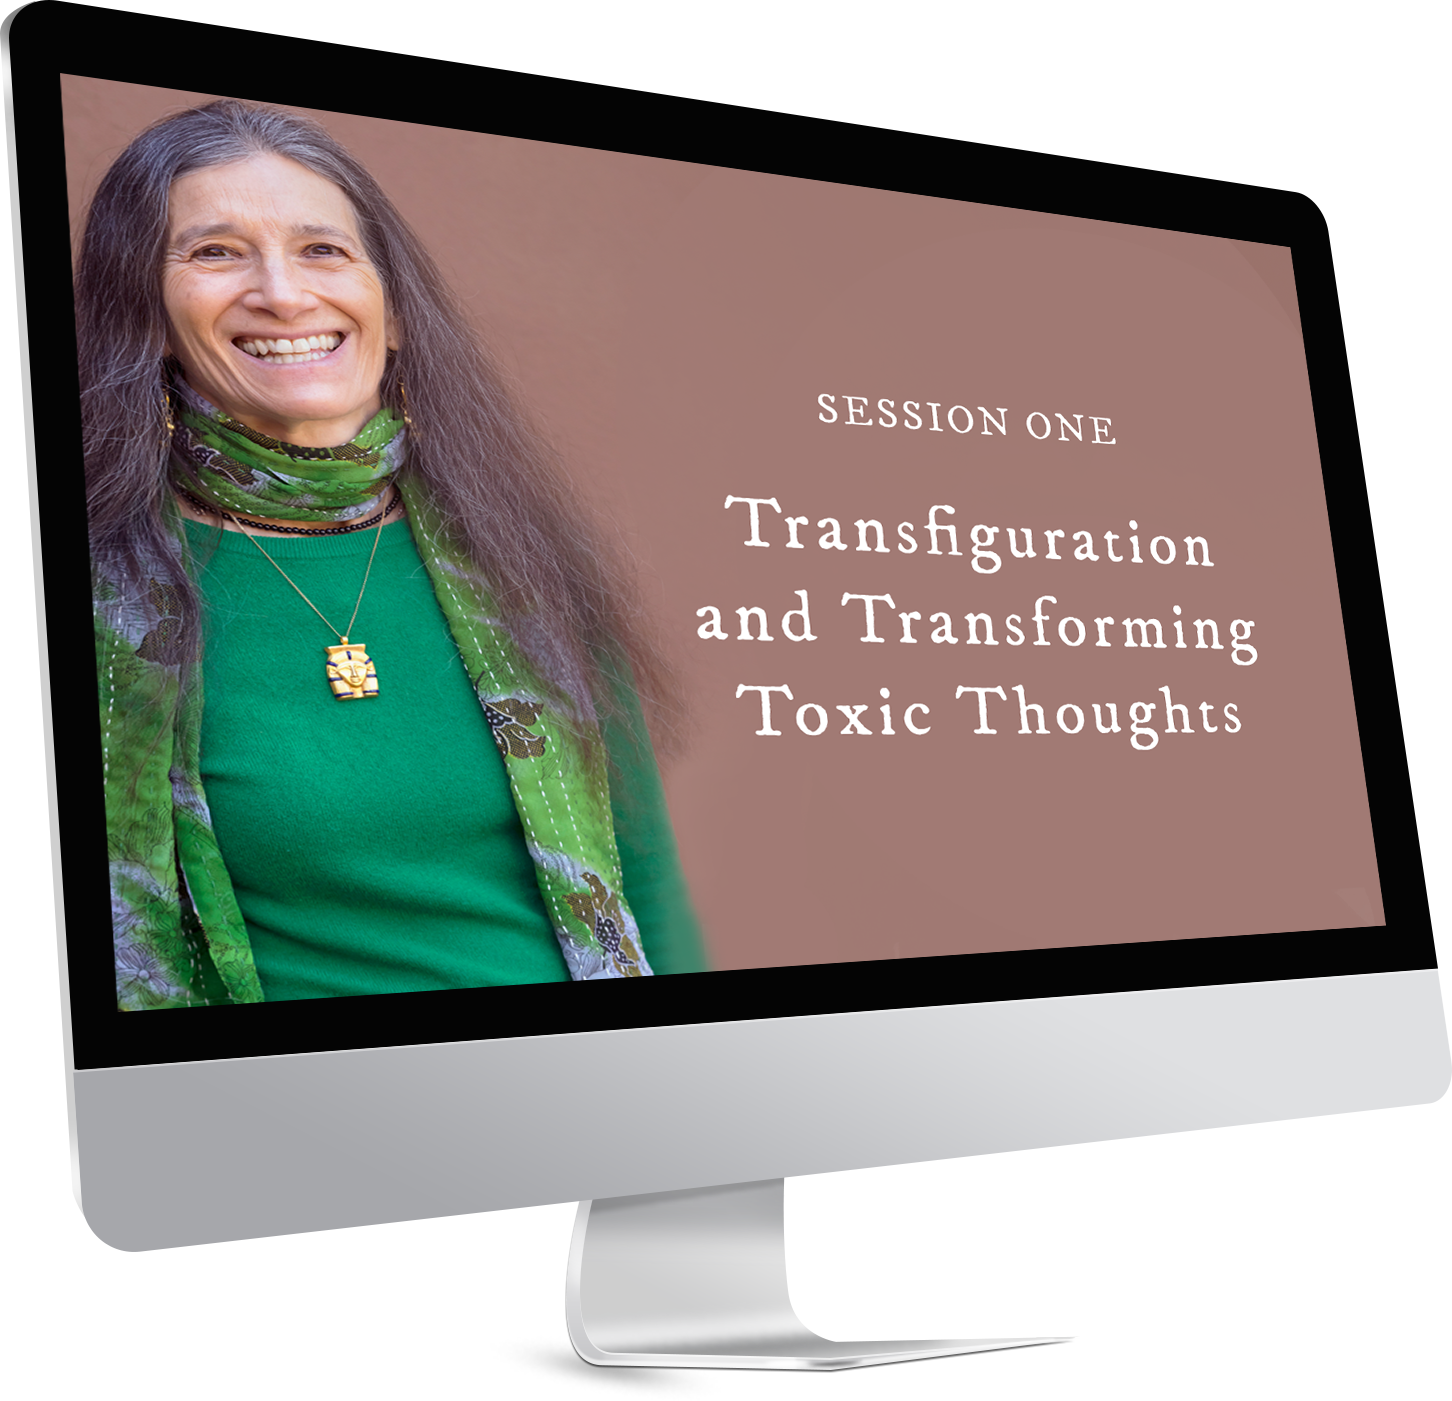 Desktop Screen Session One Transfiguration and Transforming Toxic Thoughts Image